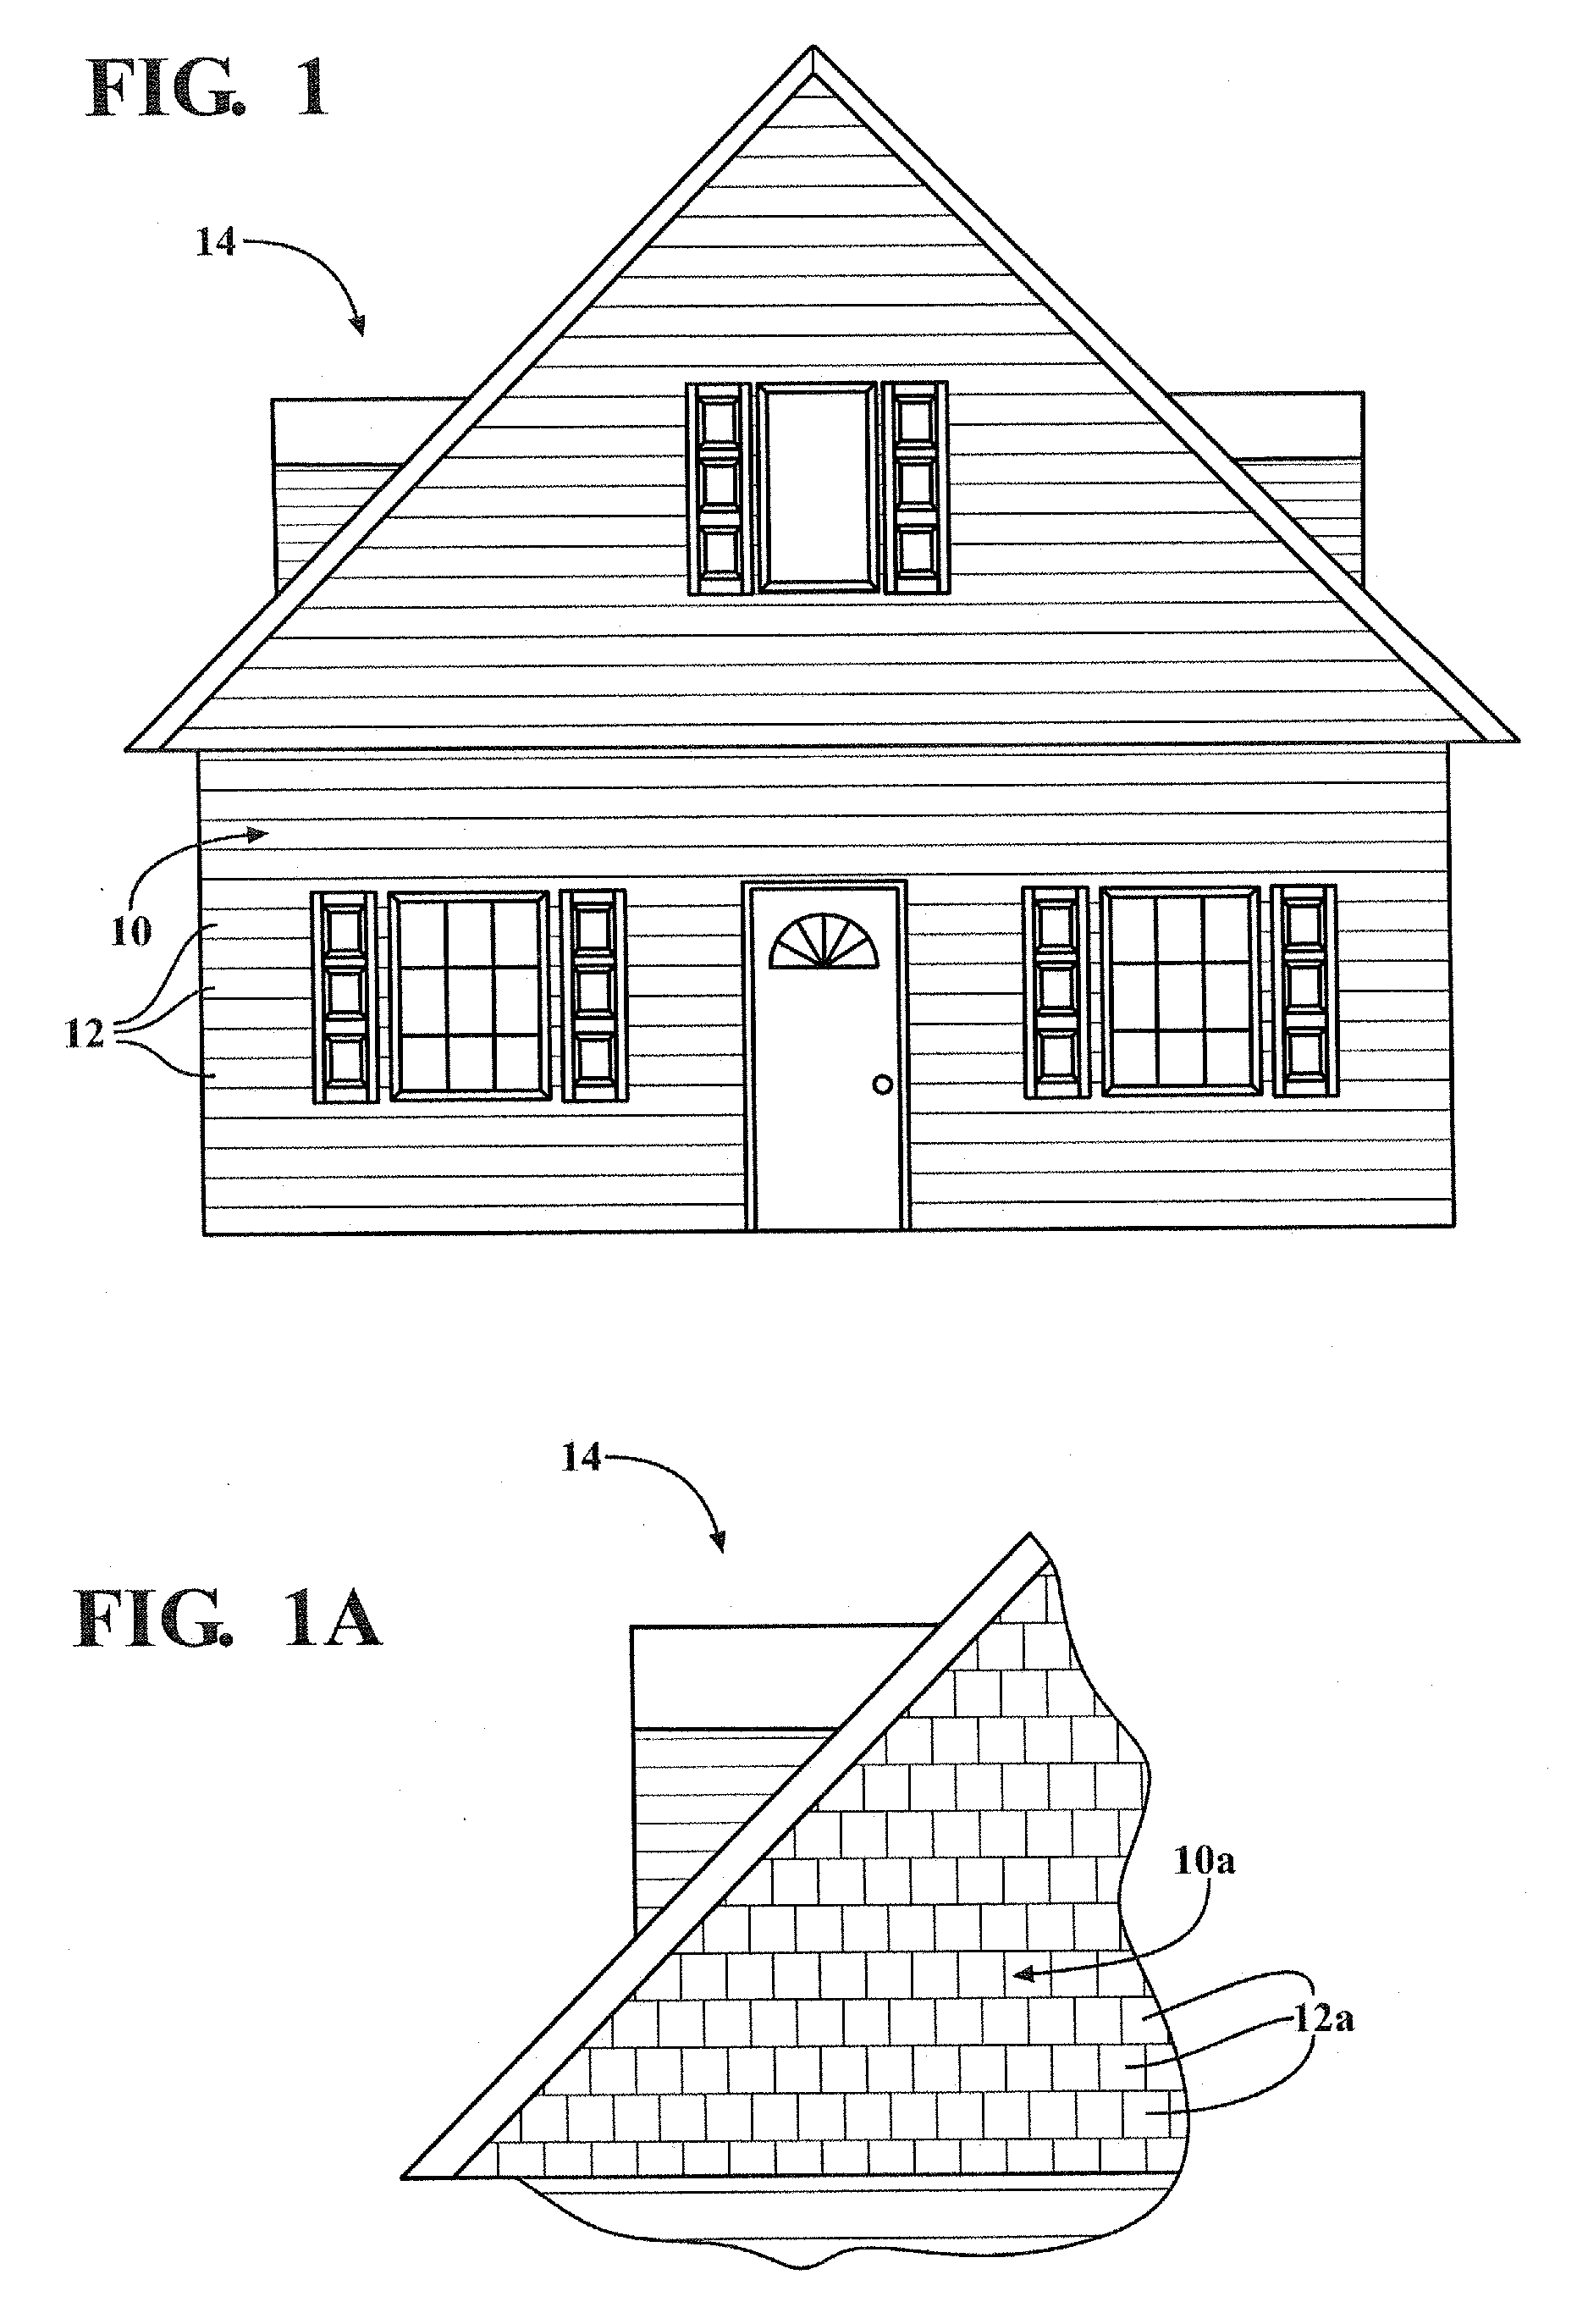 Cementitious siding having encapsulated foam core, and system and method for making the same